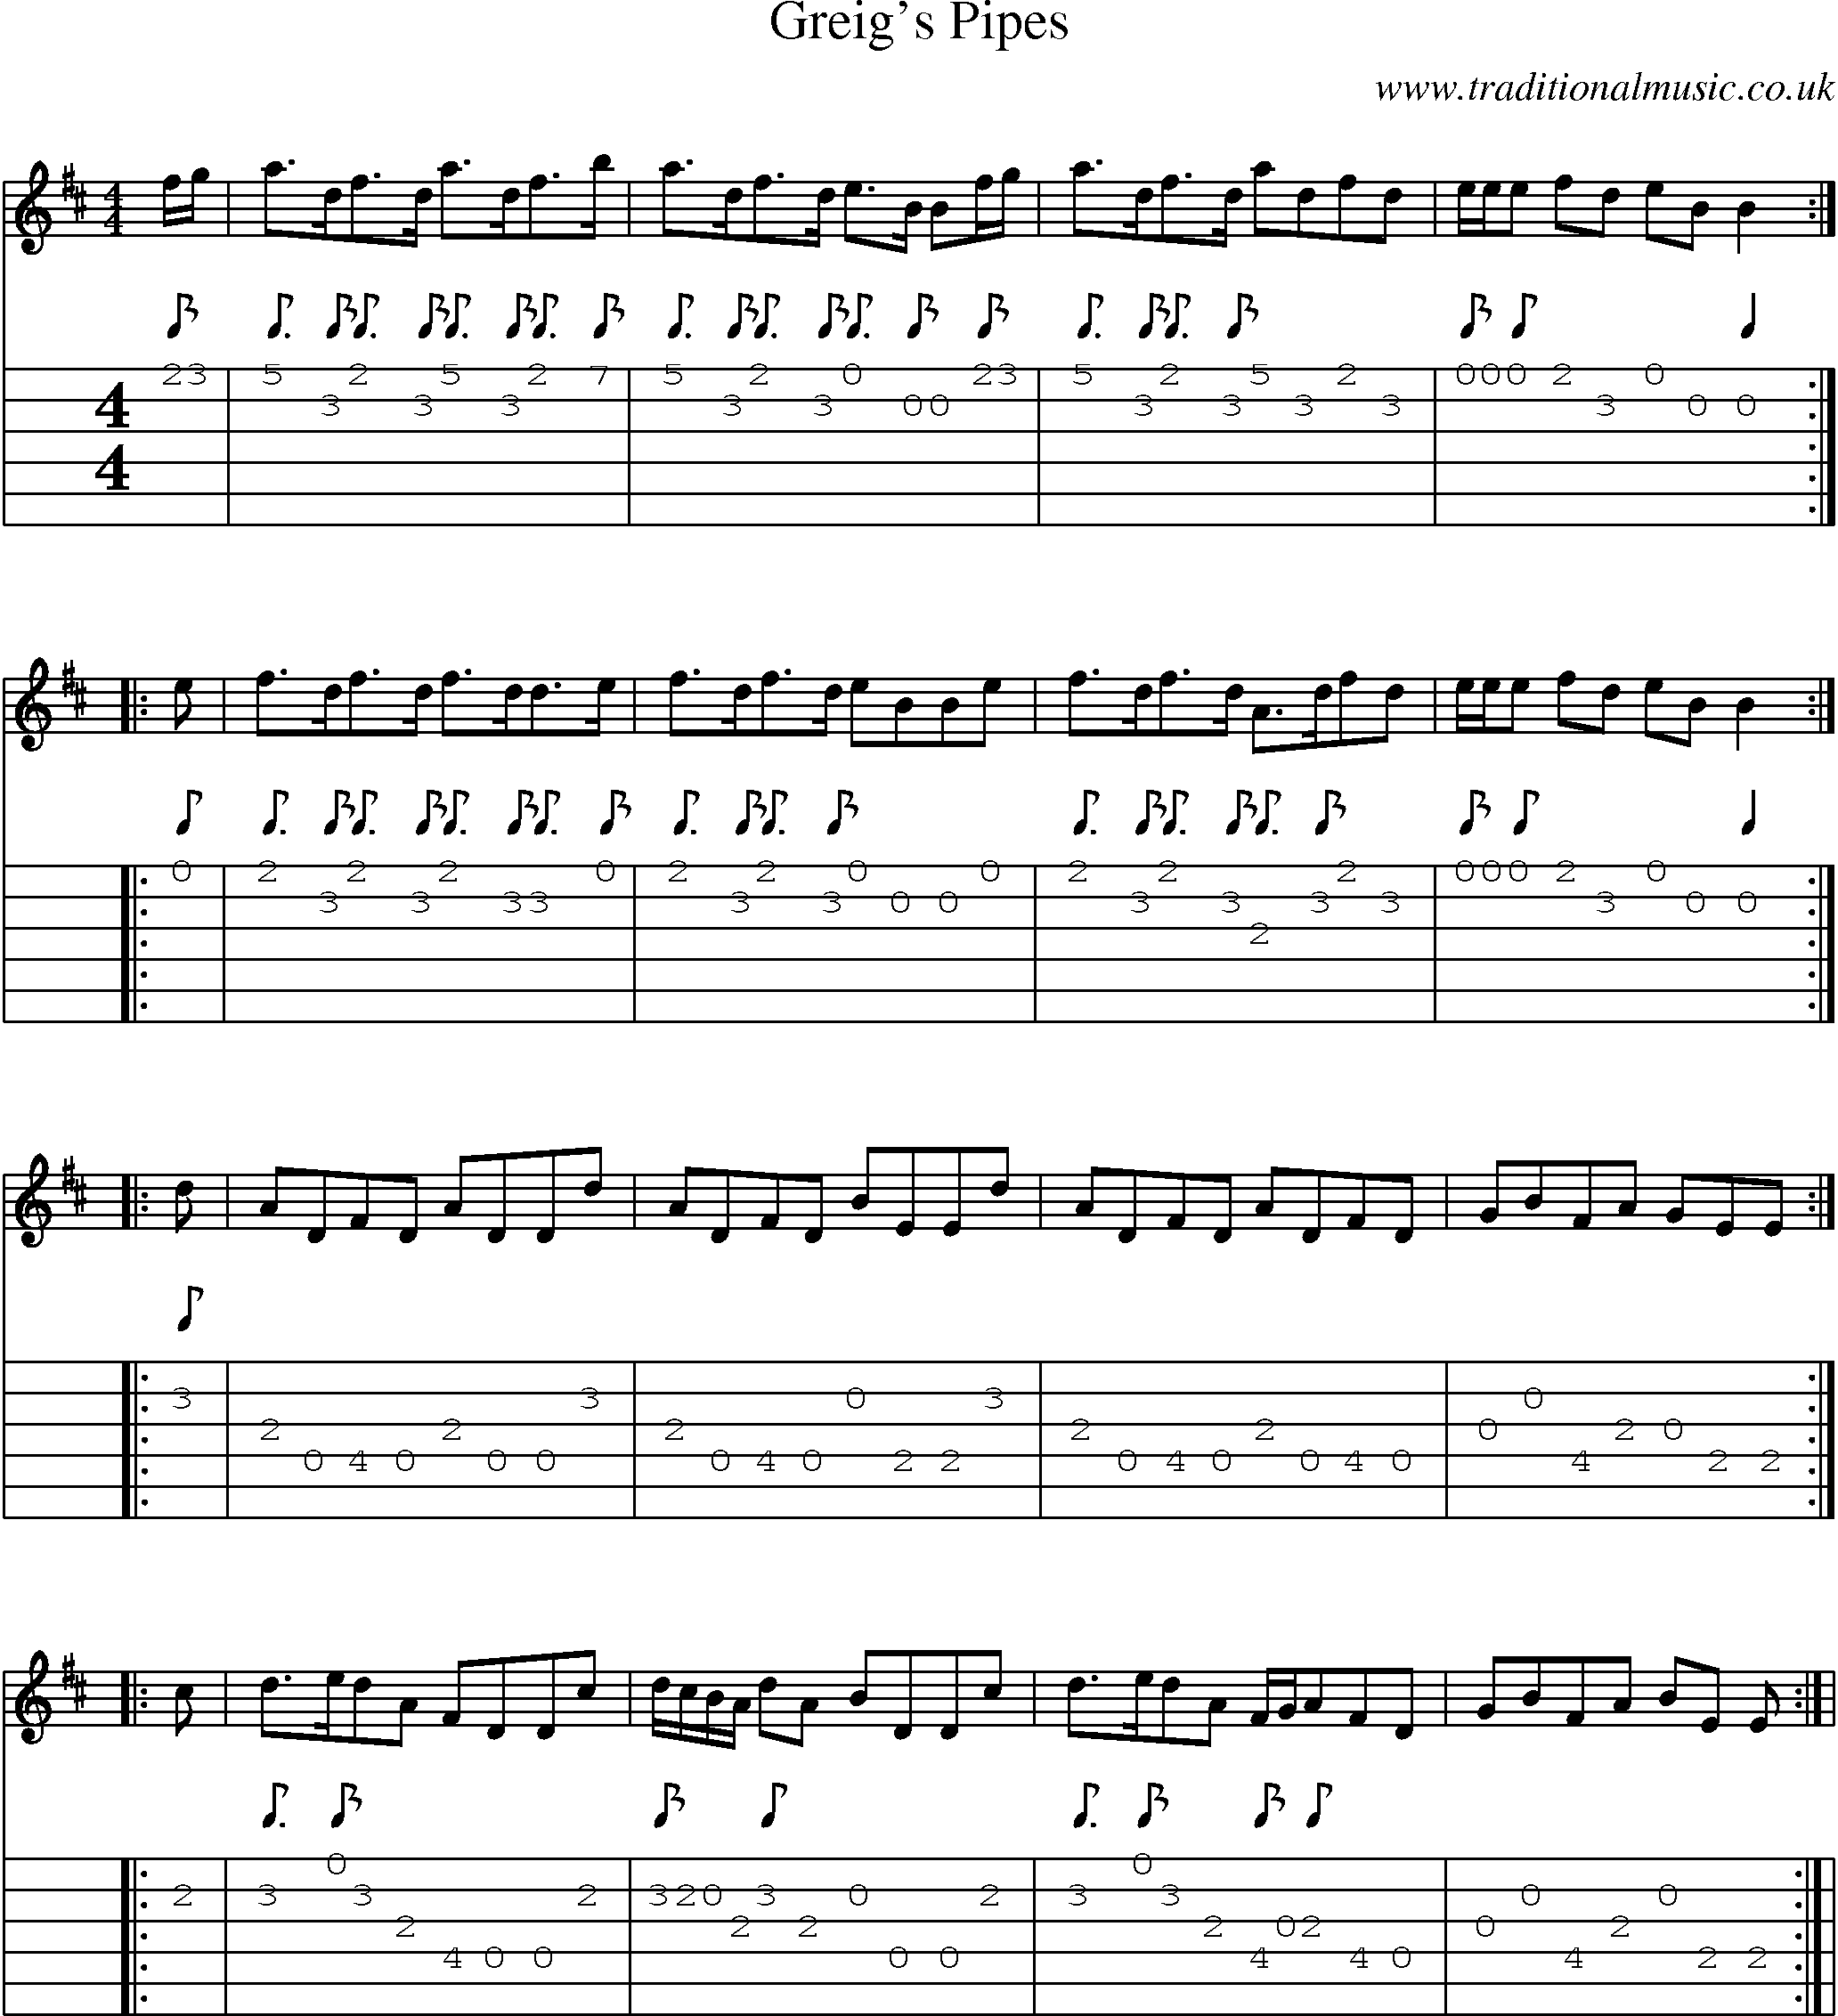 Music Score and Guitar Tabs for Greigs Pipes